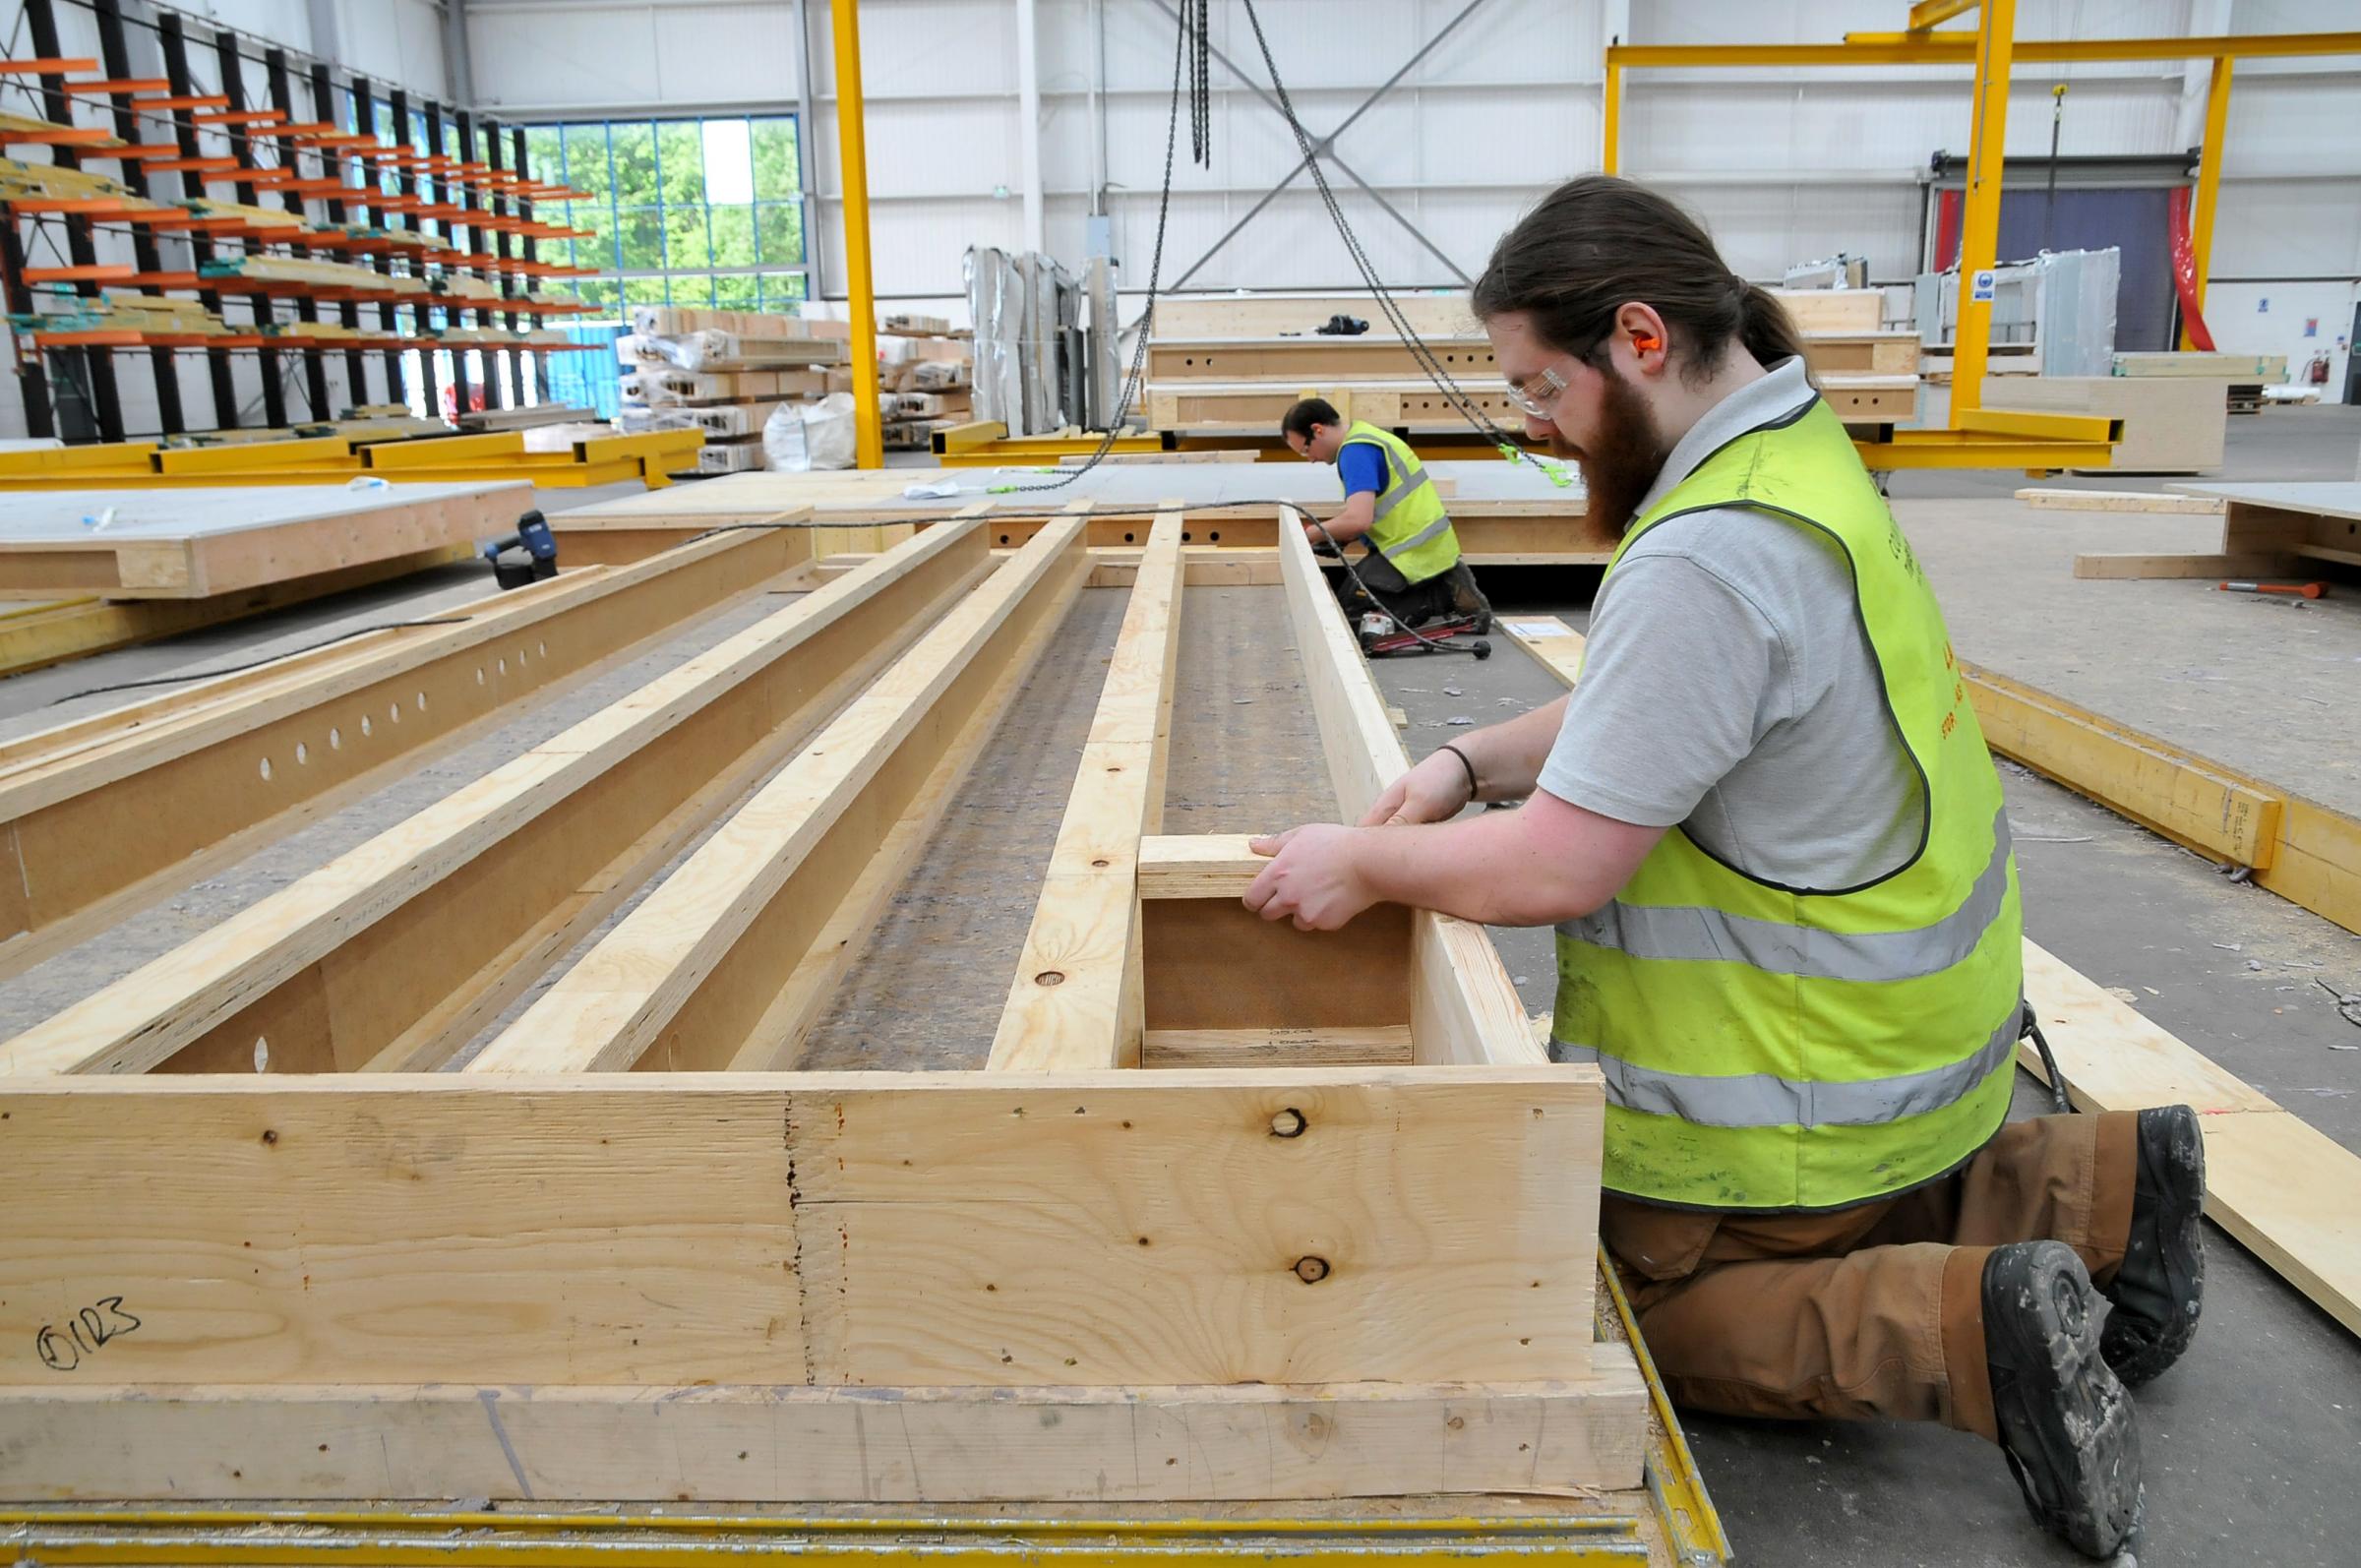 A range of panels are built, from floors to walls